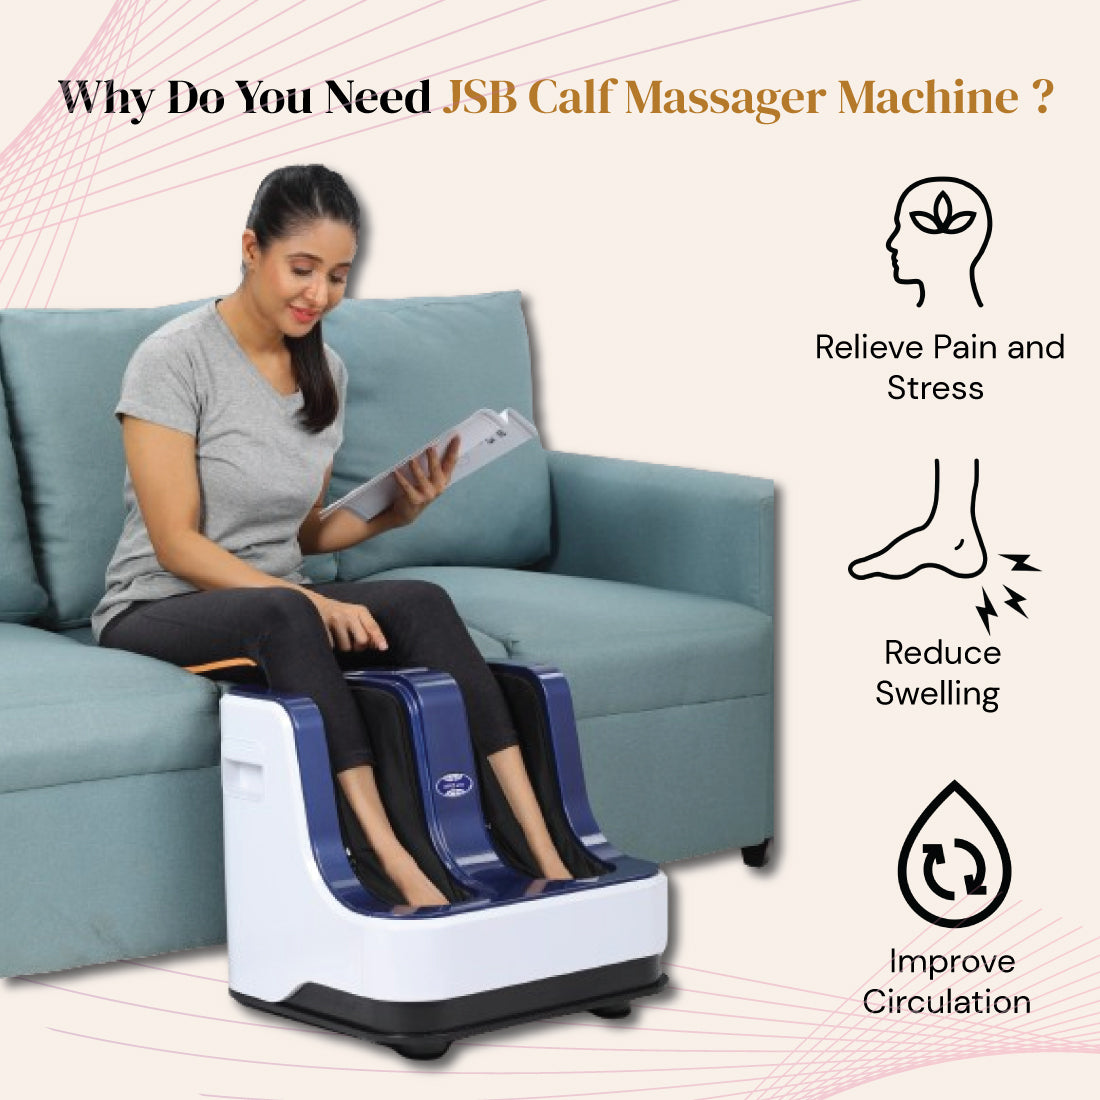 Why Calf Massager Machine JSB HF04 is beneficial